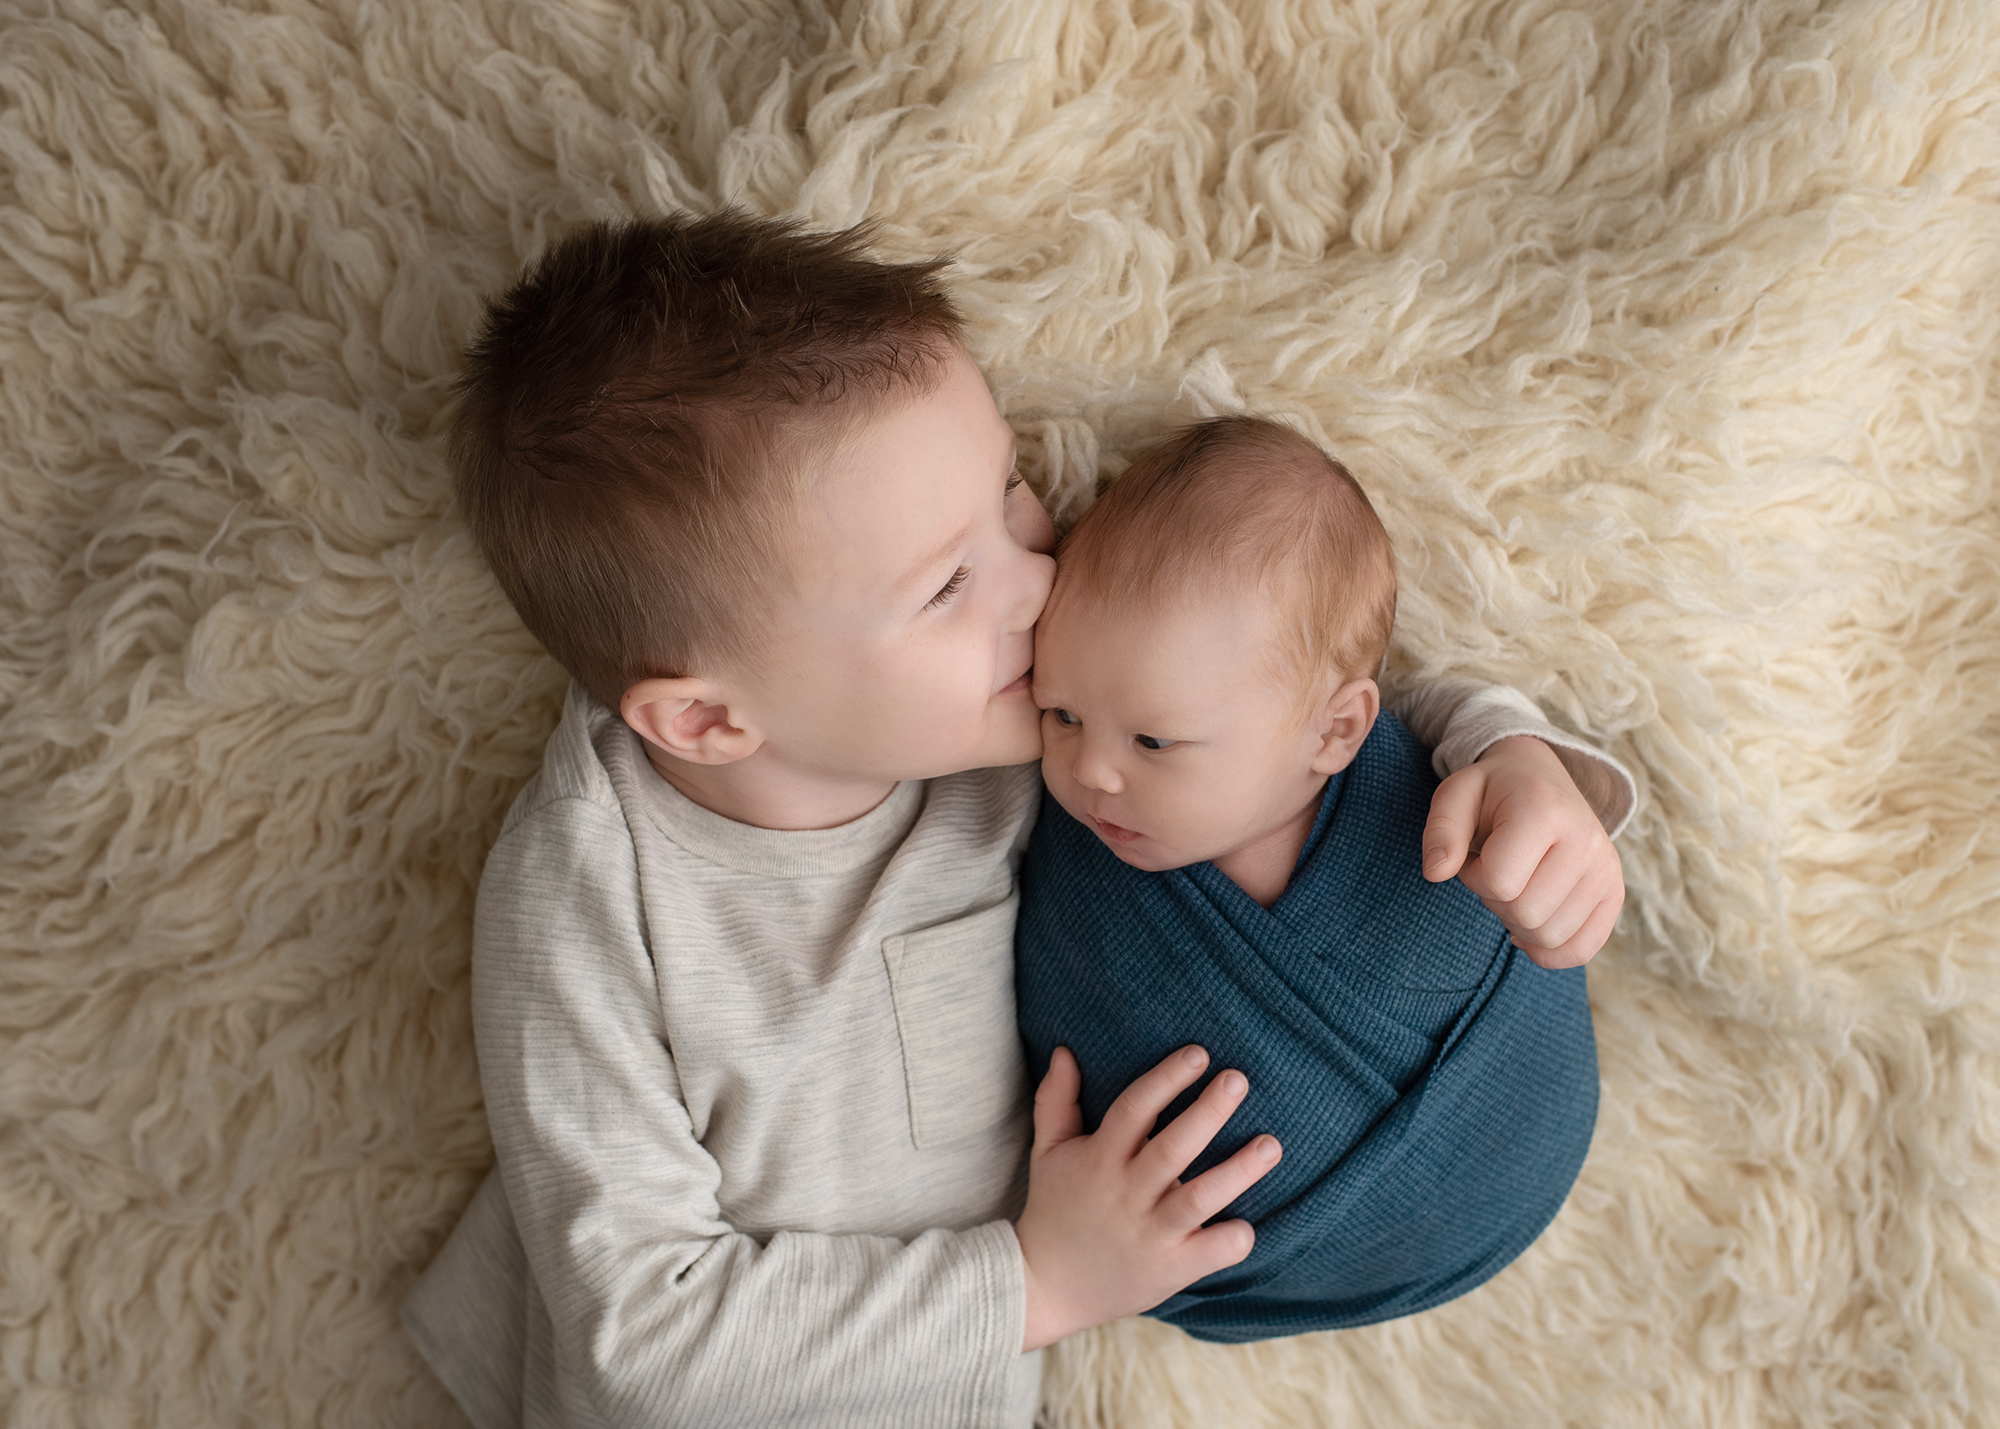 A toddler boy kisses the head of his newborn baby brothe while laying on a furry blanket honeycomb st louis